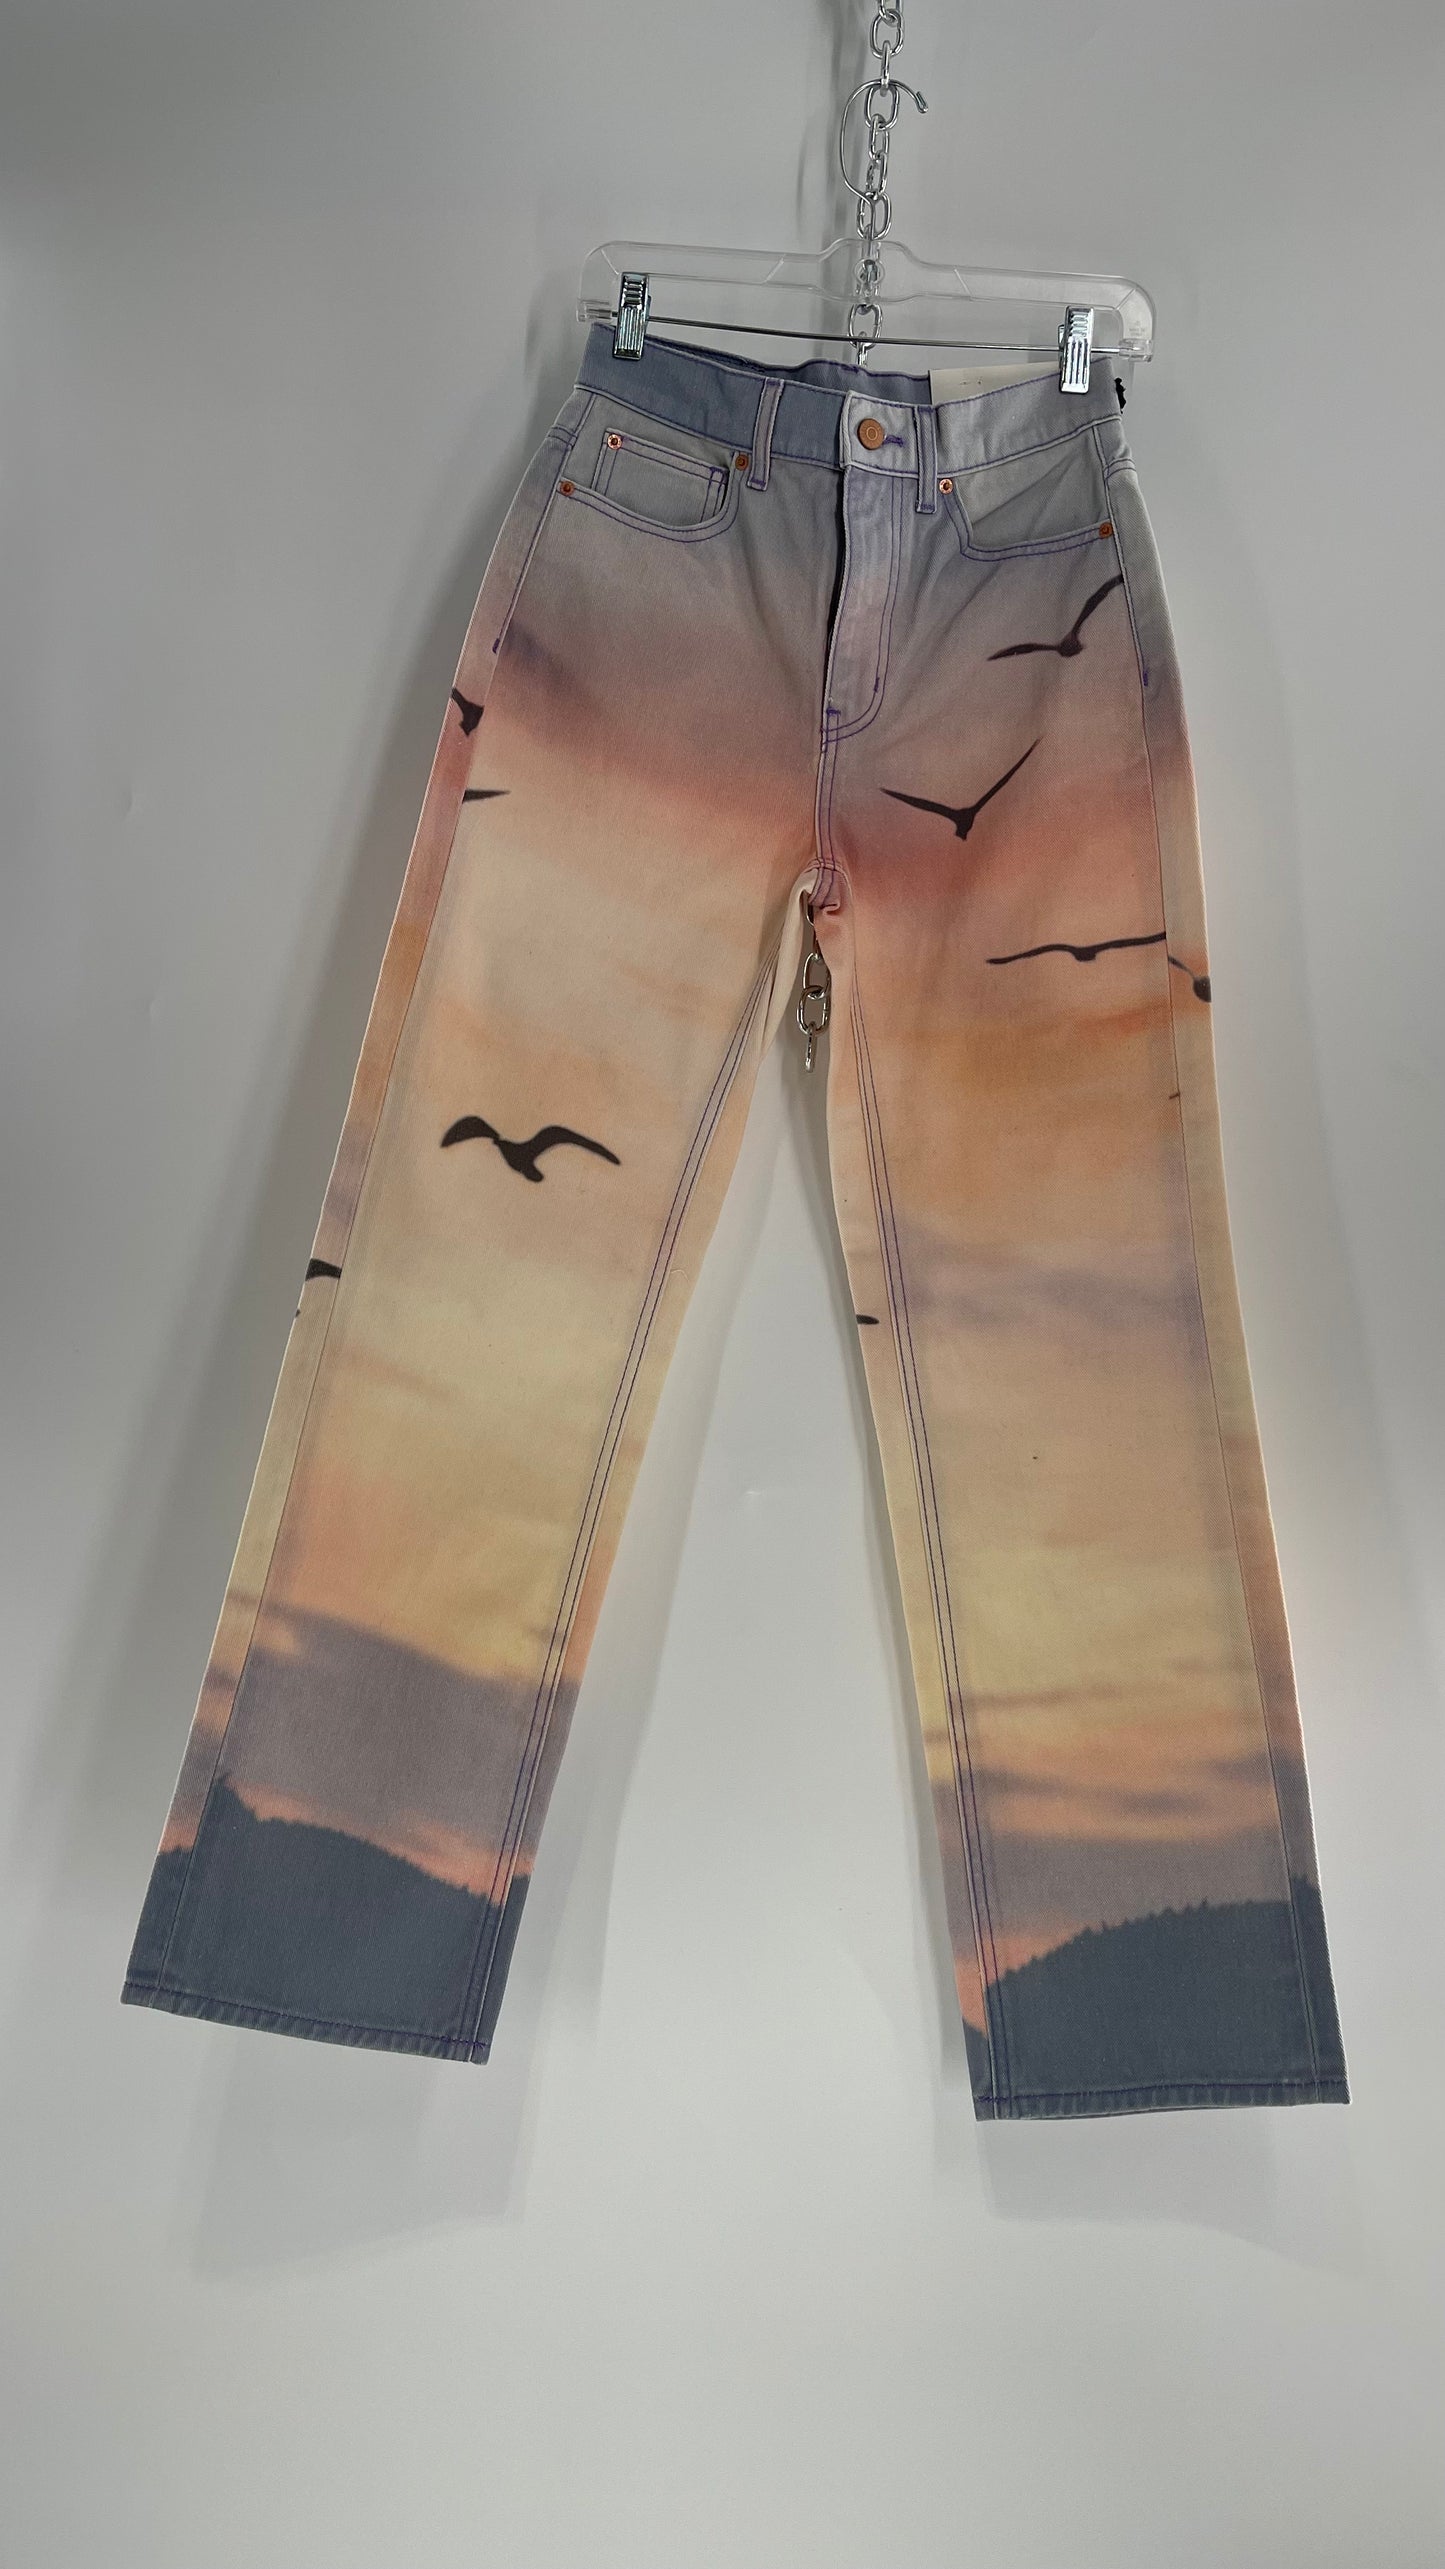 BDG Urban Outfitters Lilac Pink Horizon Line, Skyline Graphic Jeans (26)